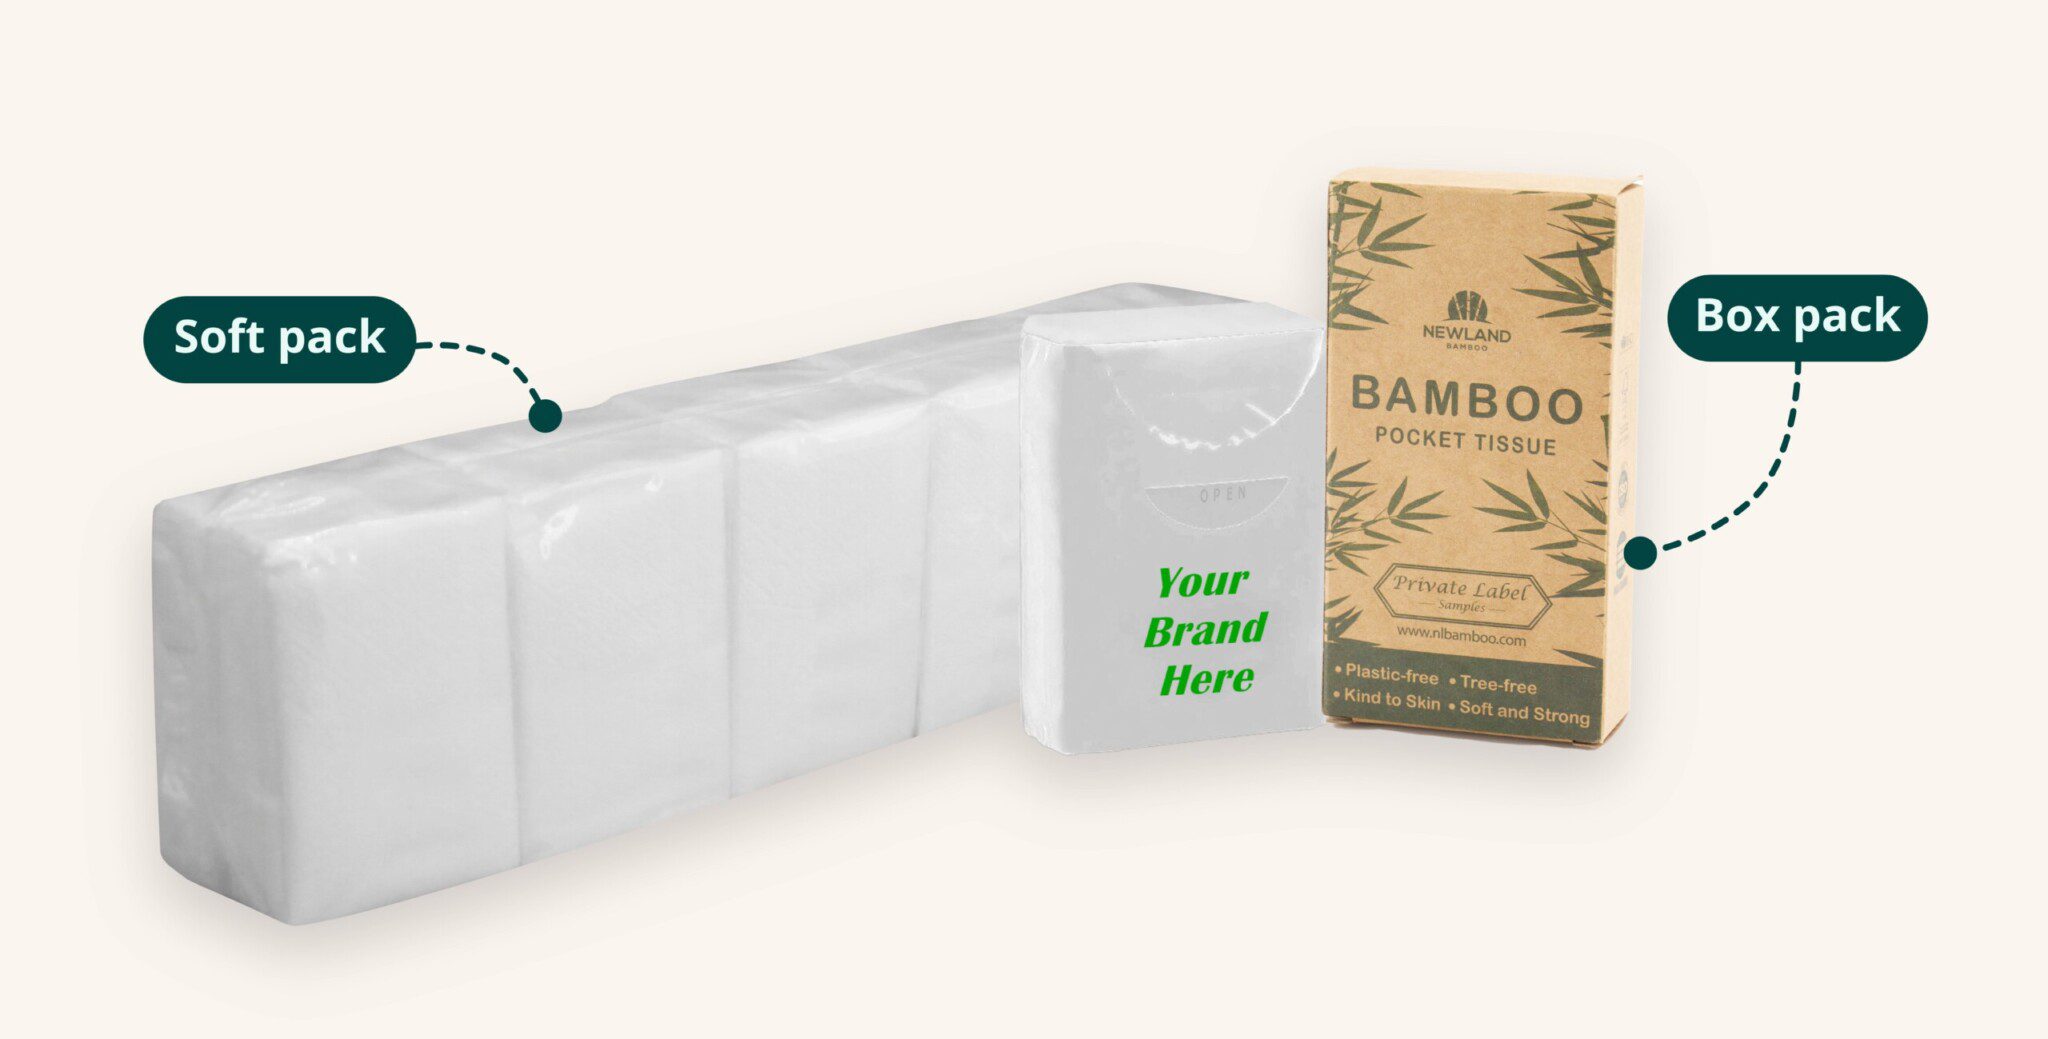 Customized solutions for all your private label pocket tissue packaging needs!